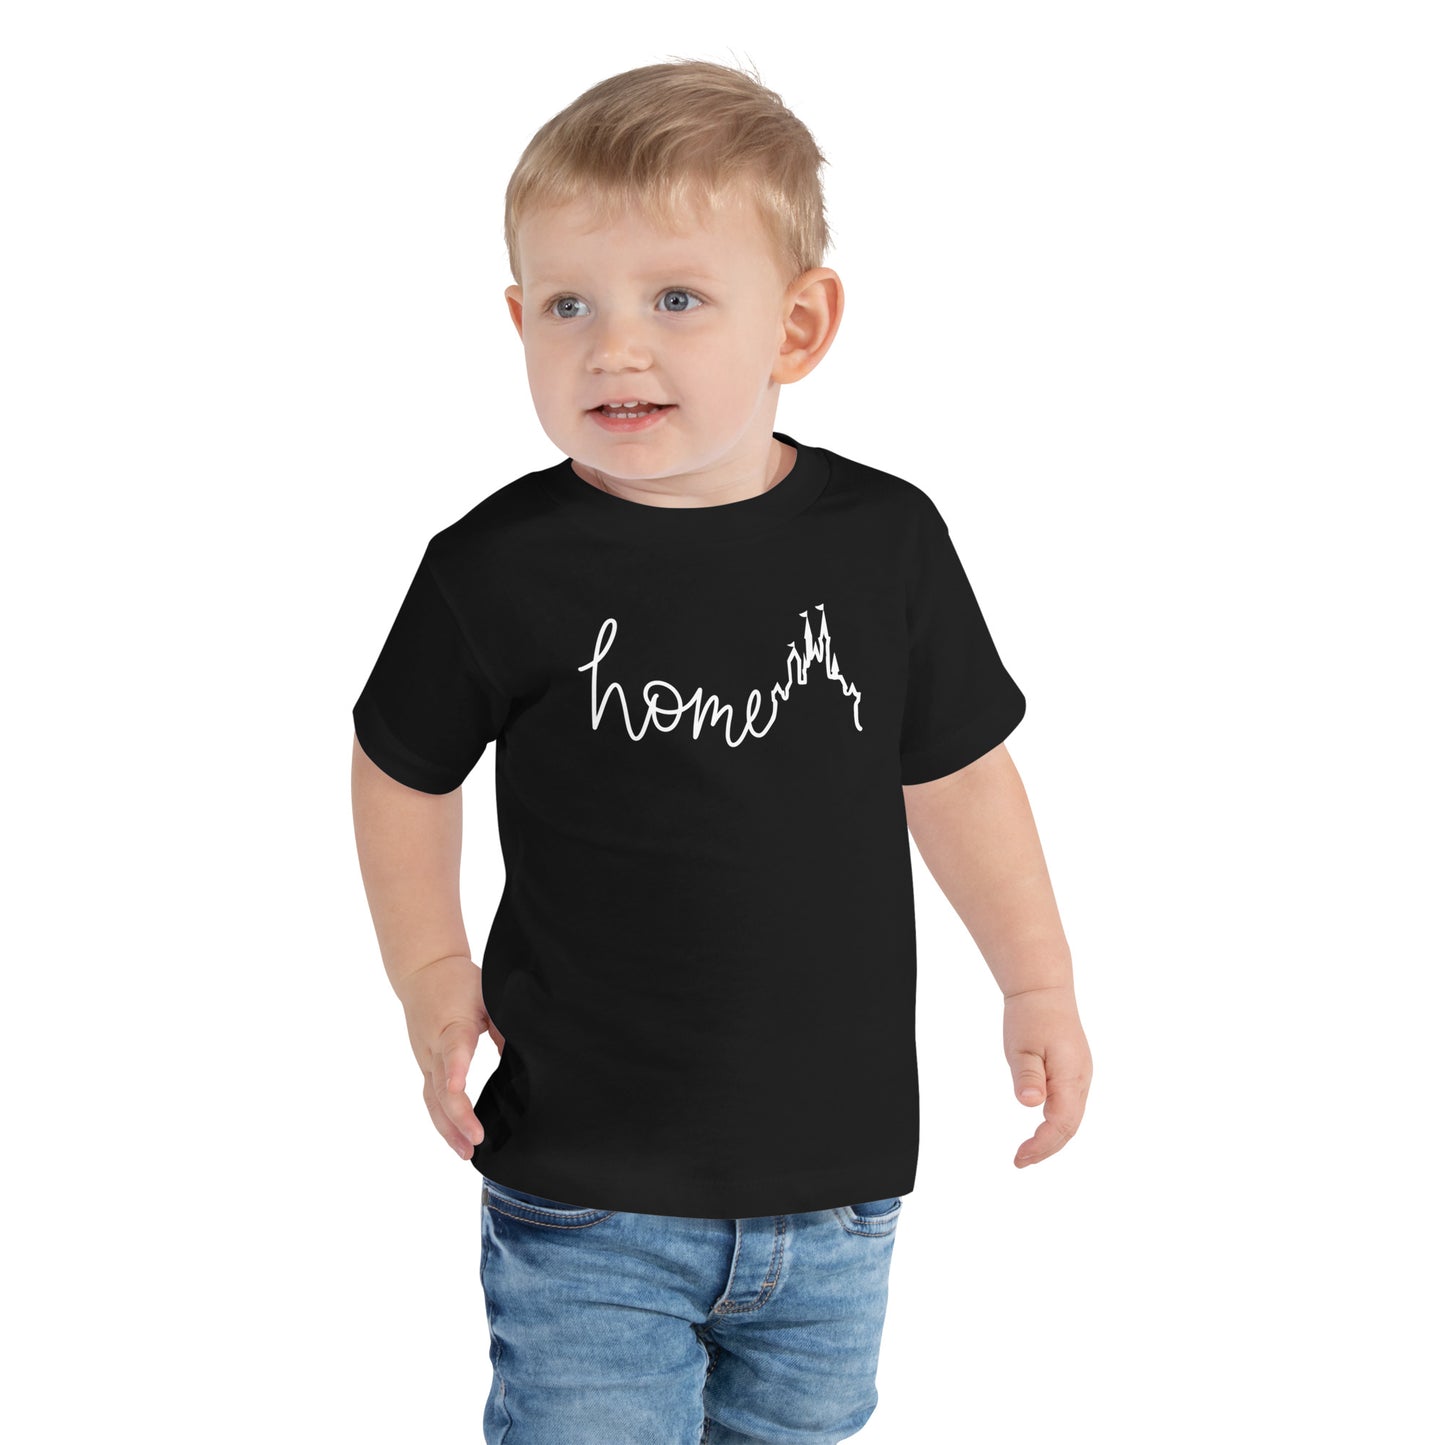 Castle Home East Toddler Tee